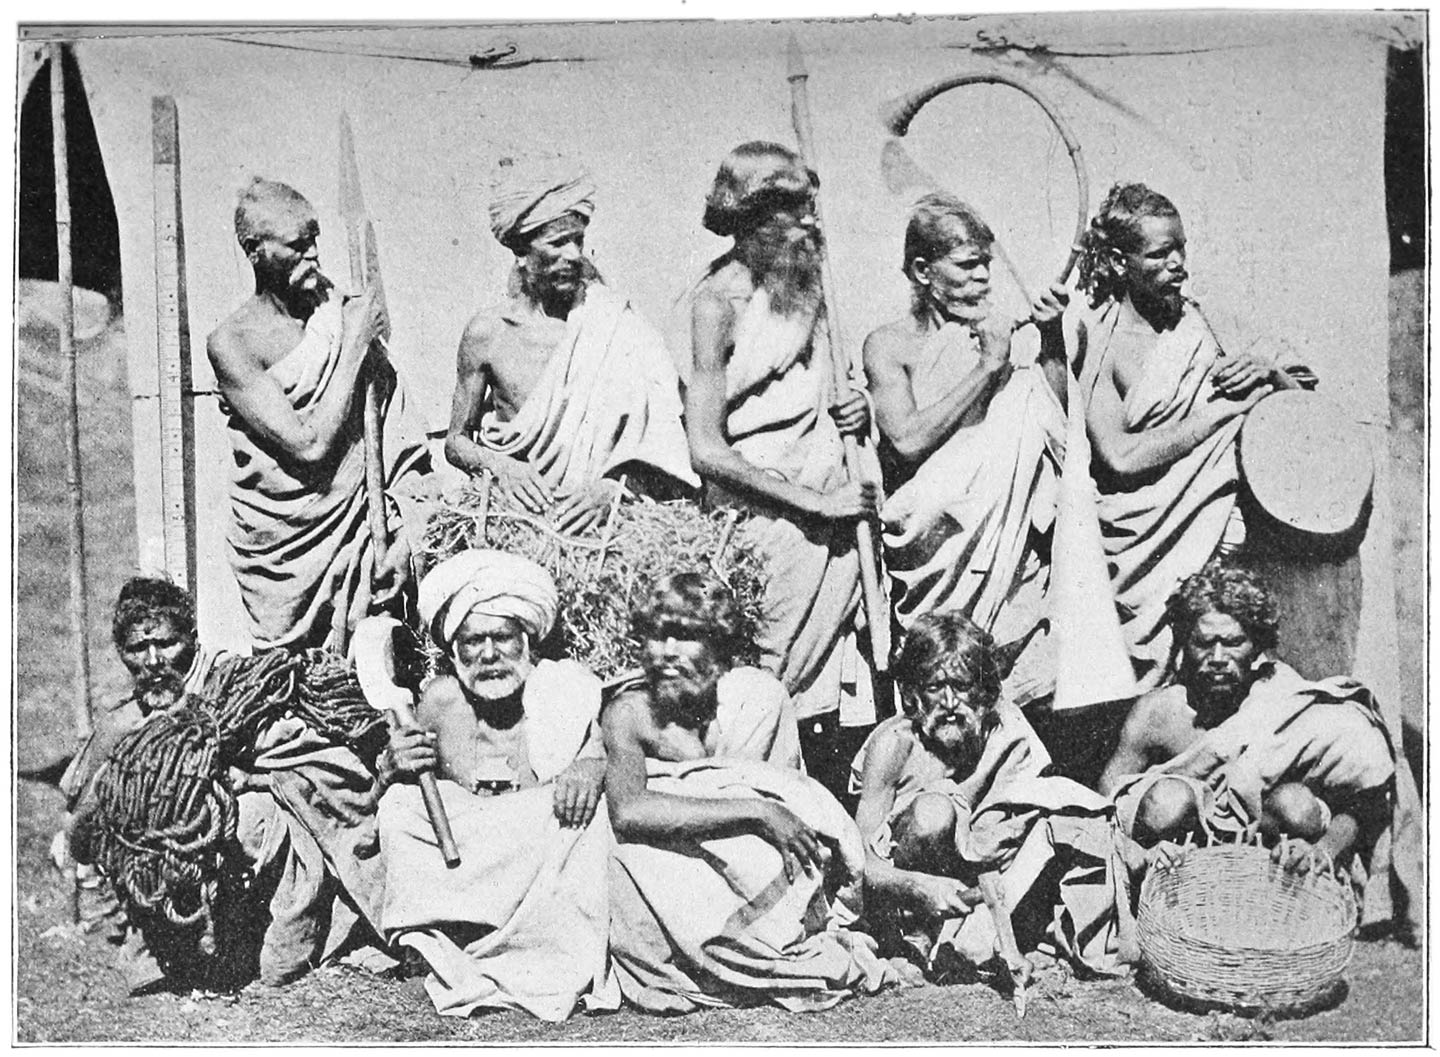 FIG. 68 (FROM BREEKS).—THE FIVE TRIBES OF THE NILGIRI HILLS.